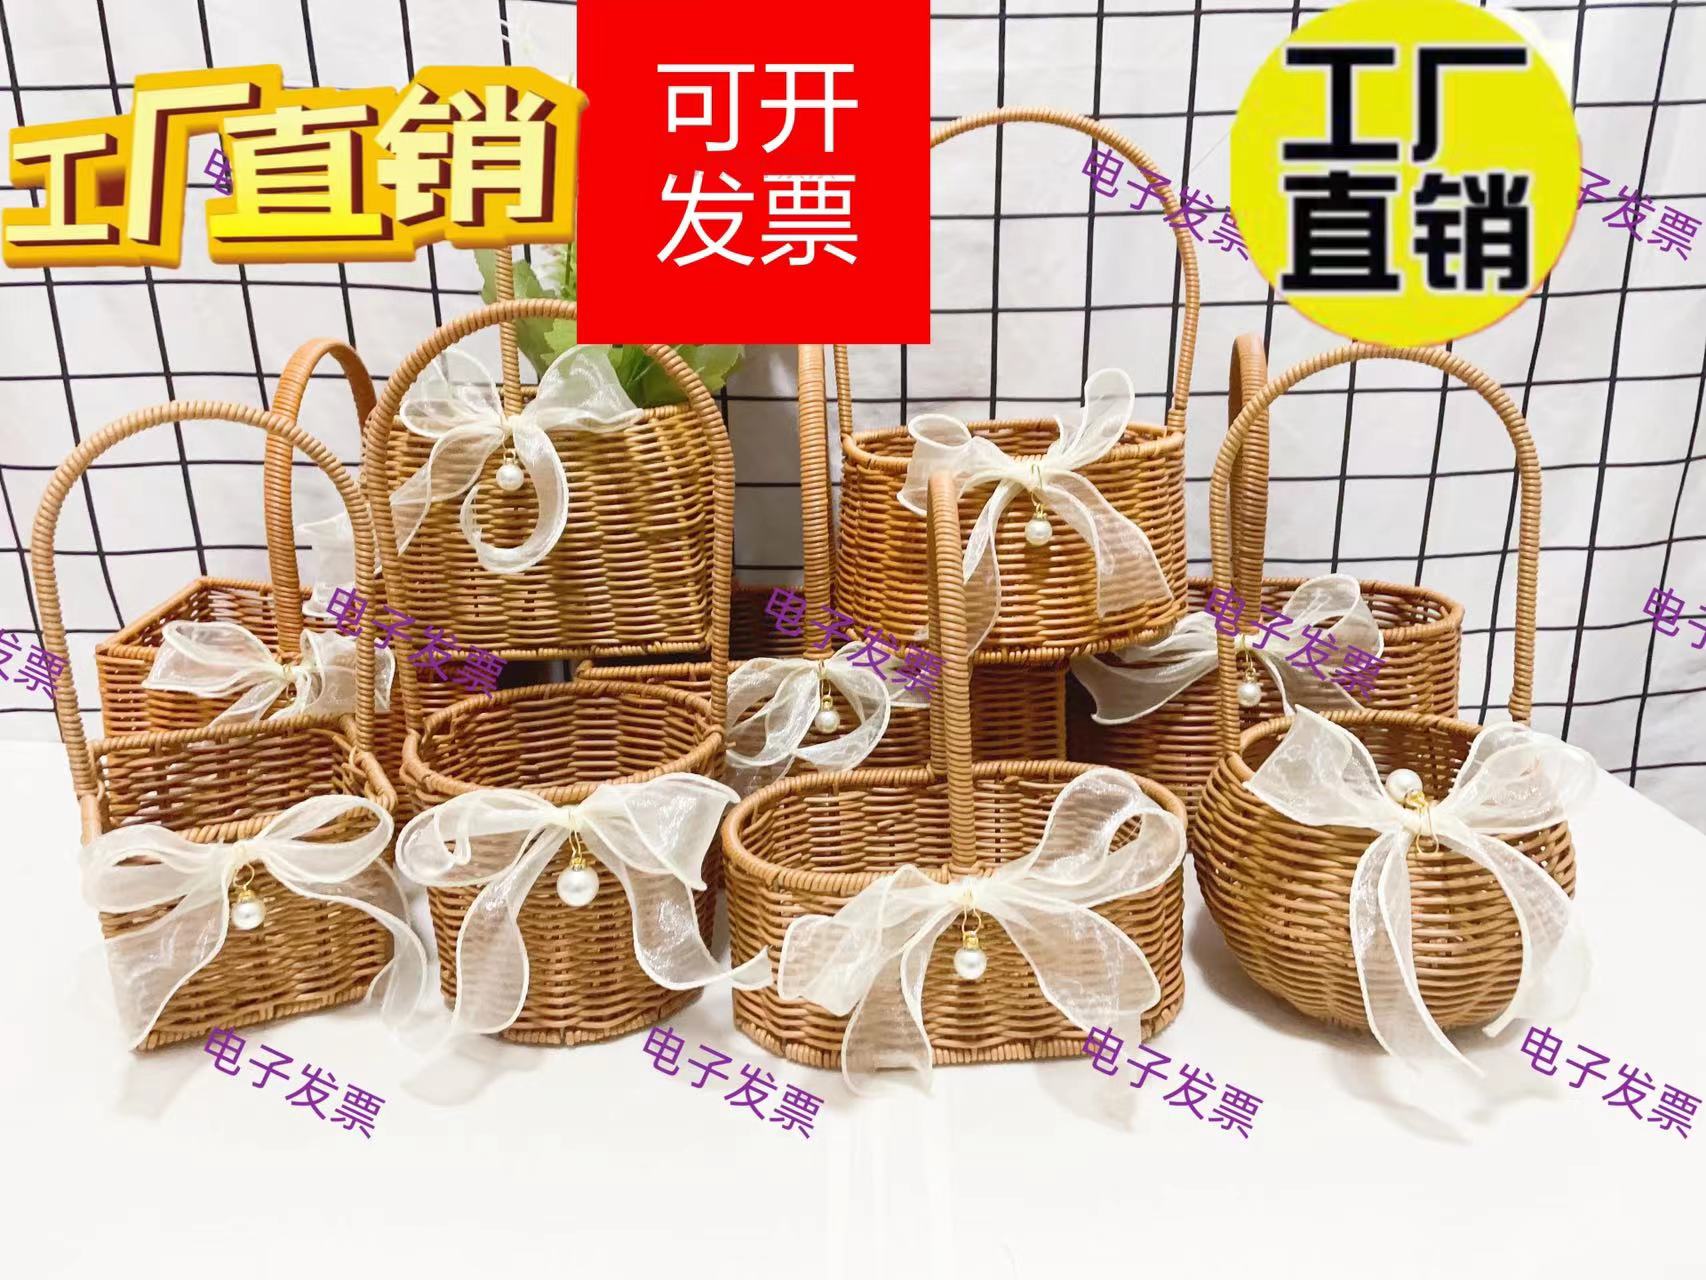 Christmas flower basket rattan with new flower pots Picnic Pure Hand Woven Vines Handfields Hand Fields Creative Vines choreograpes-Taobao